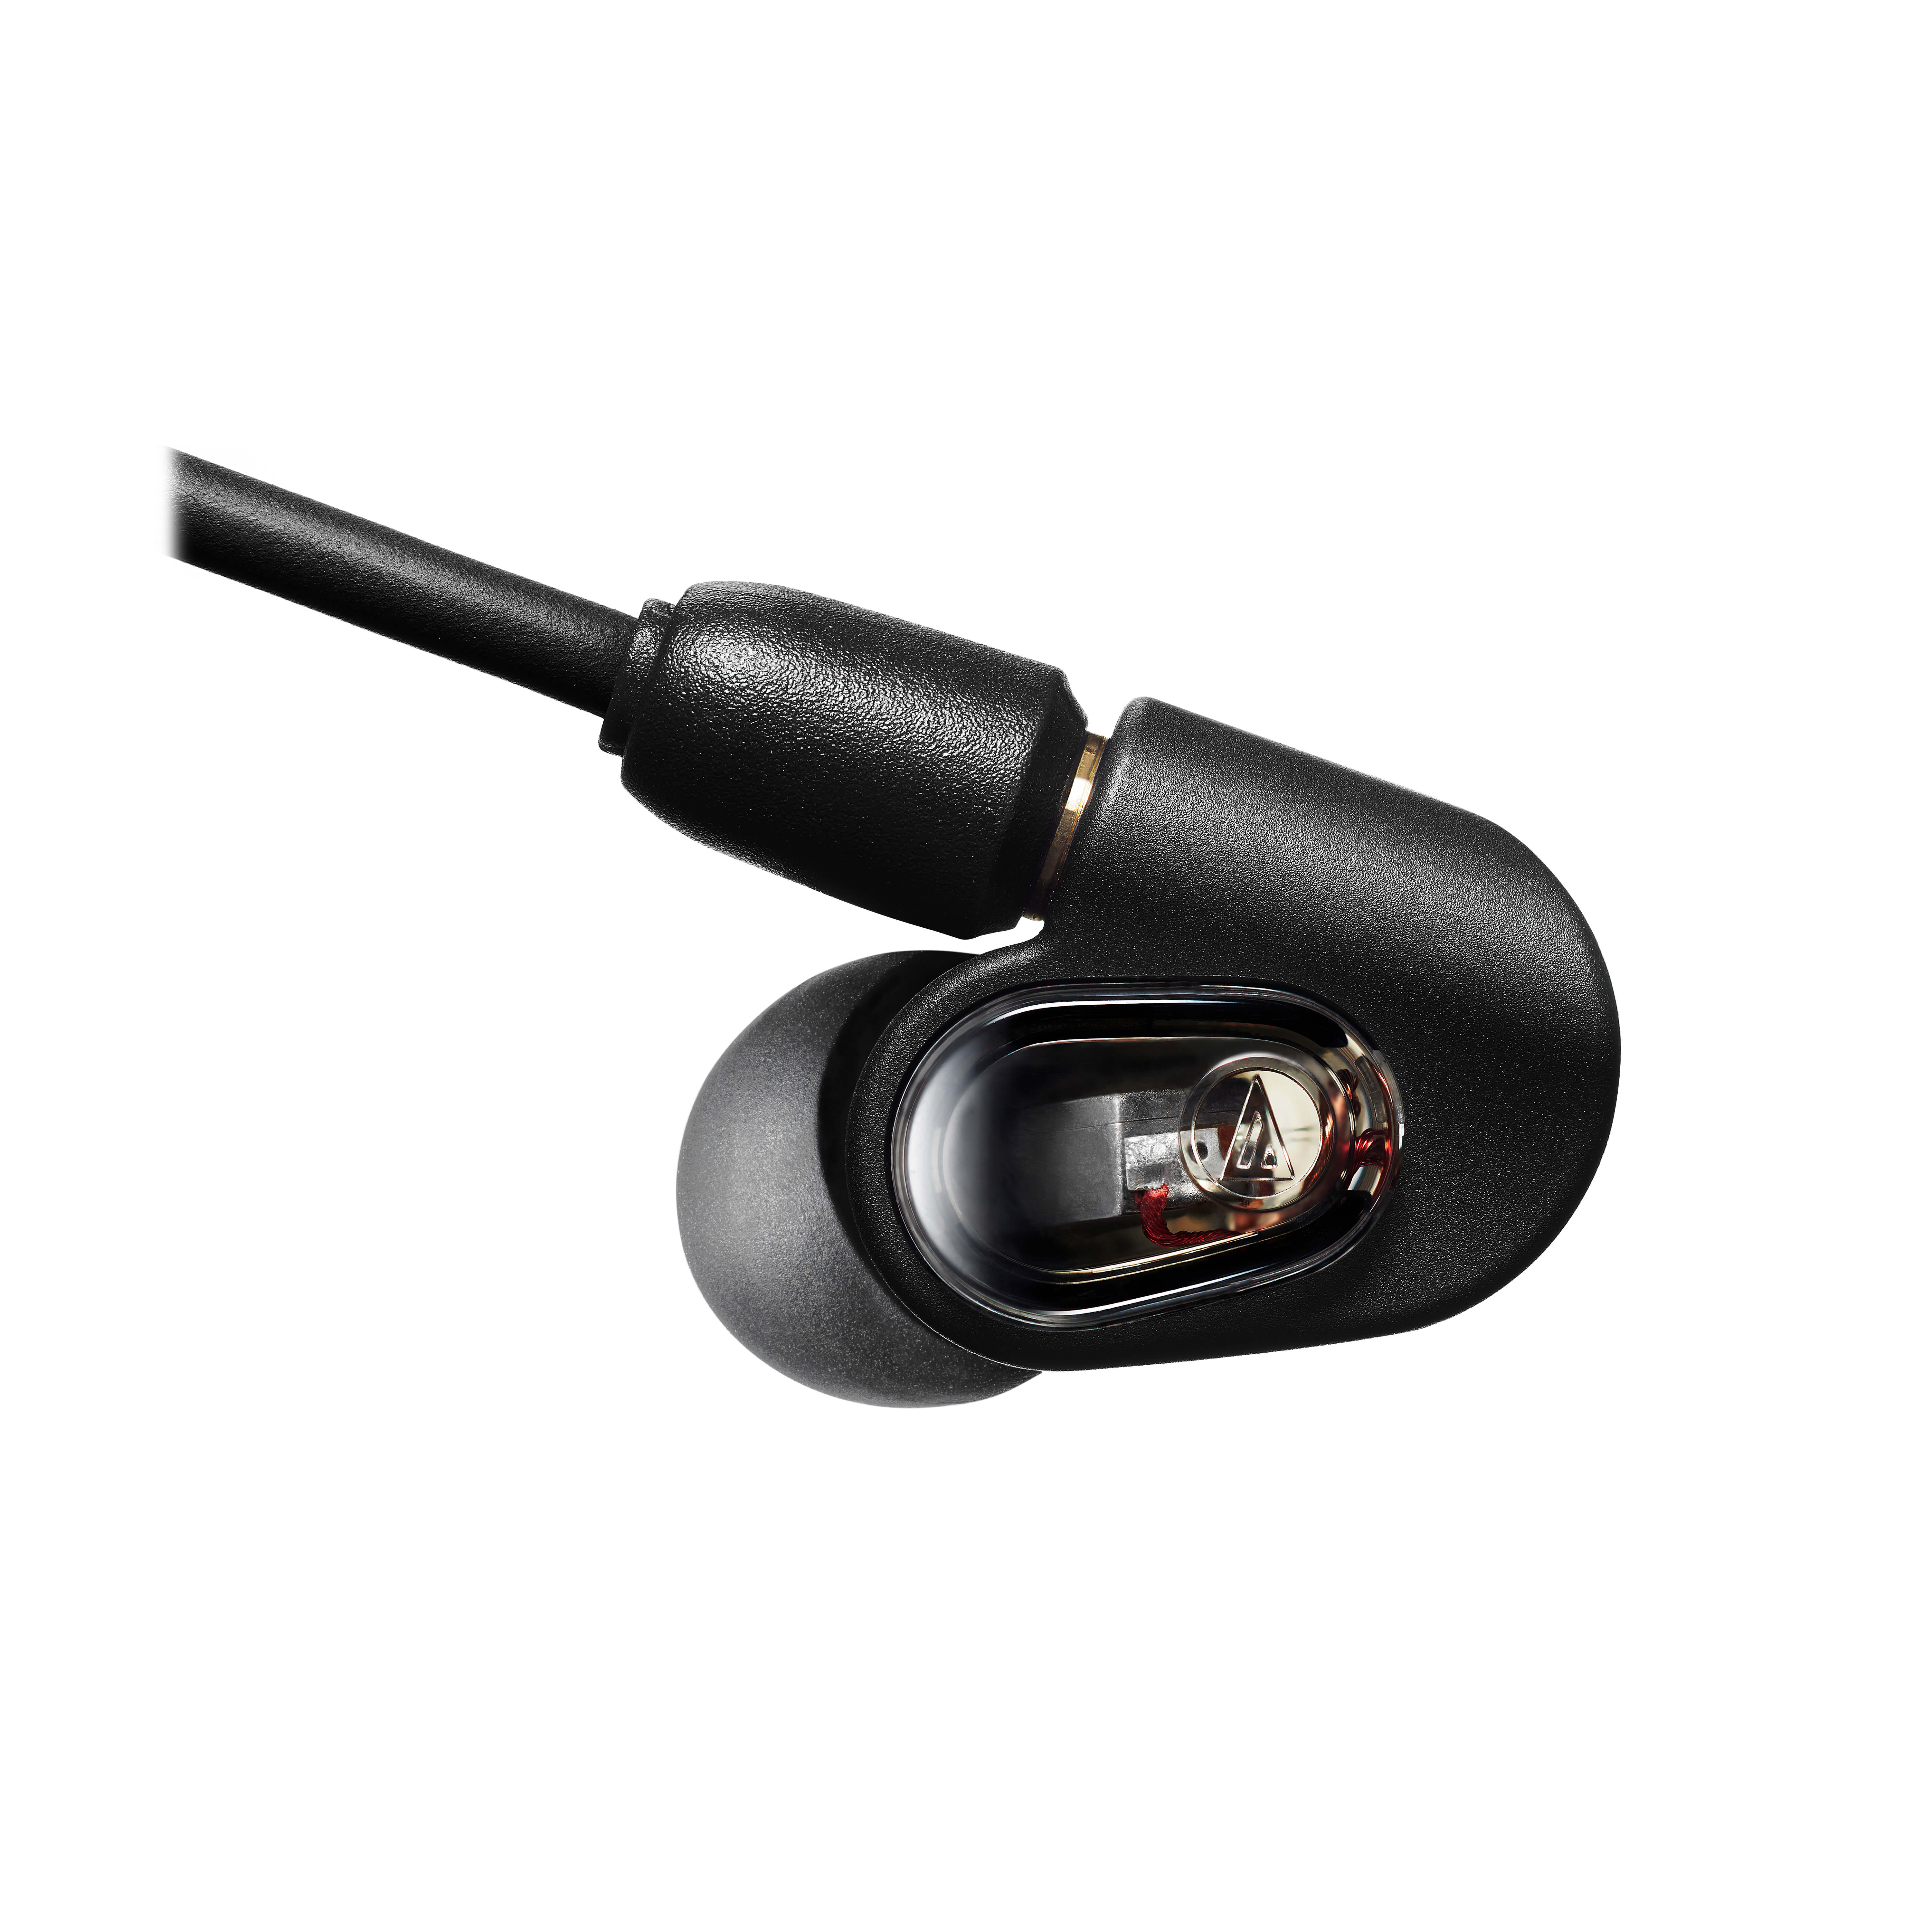 TOUR TEST: Enter to Win Audio-Technica In-Ear Monitors For Your Band